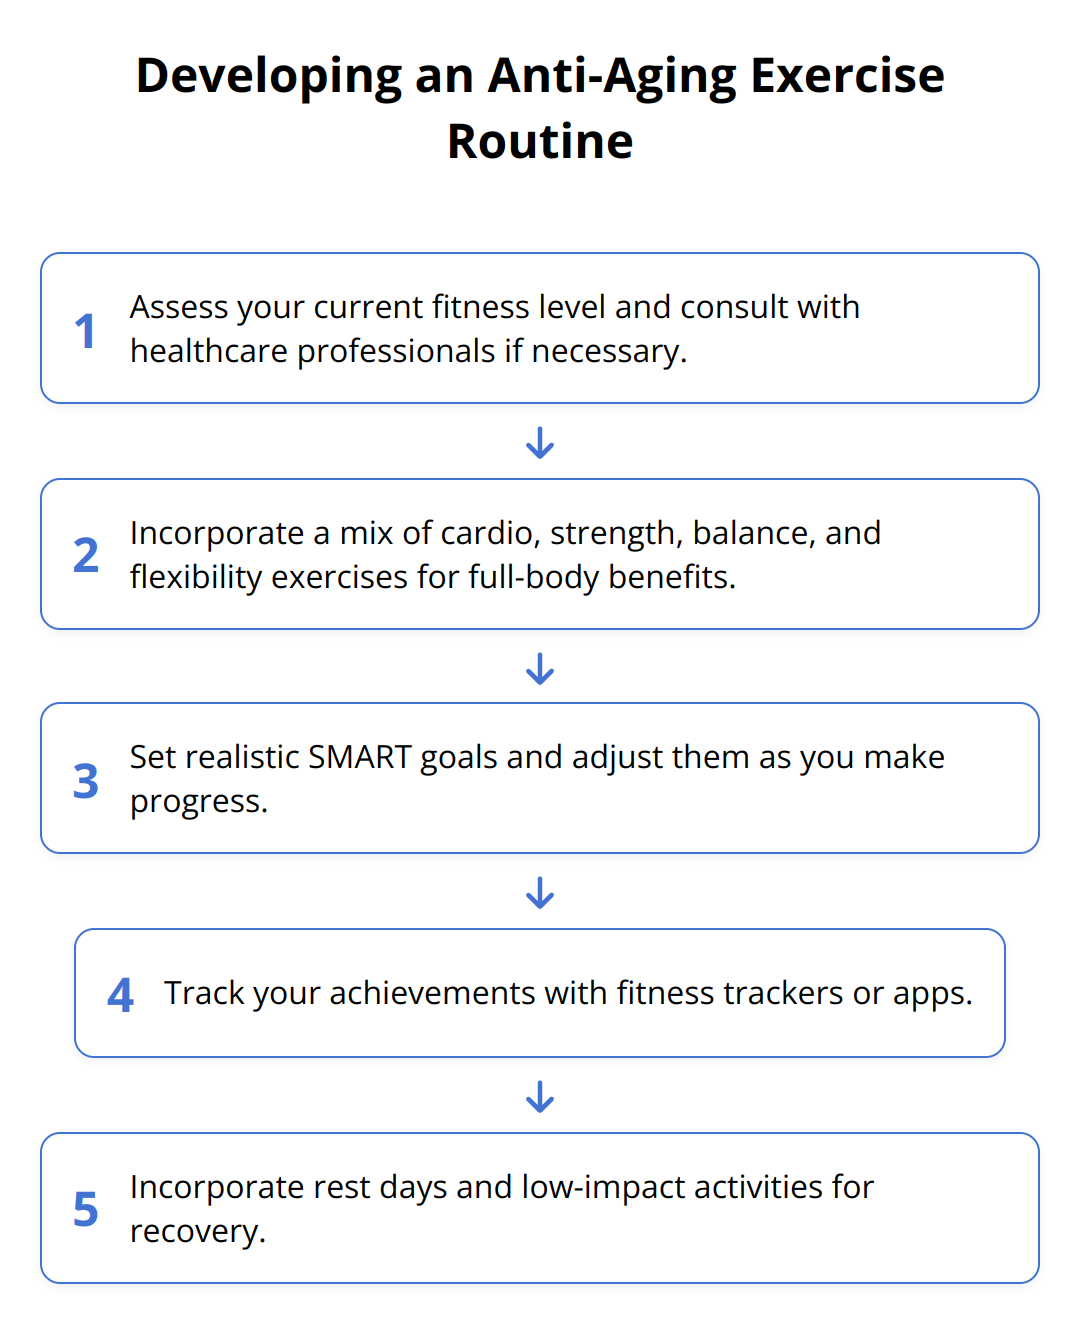 Flow Chart - Developing an Anti-Aging Exercise Routine